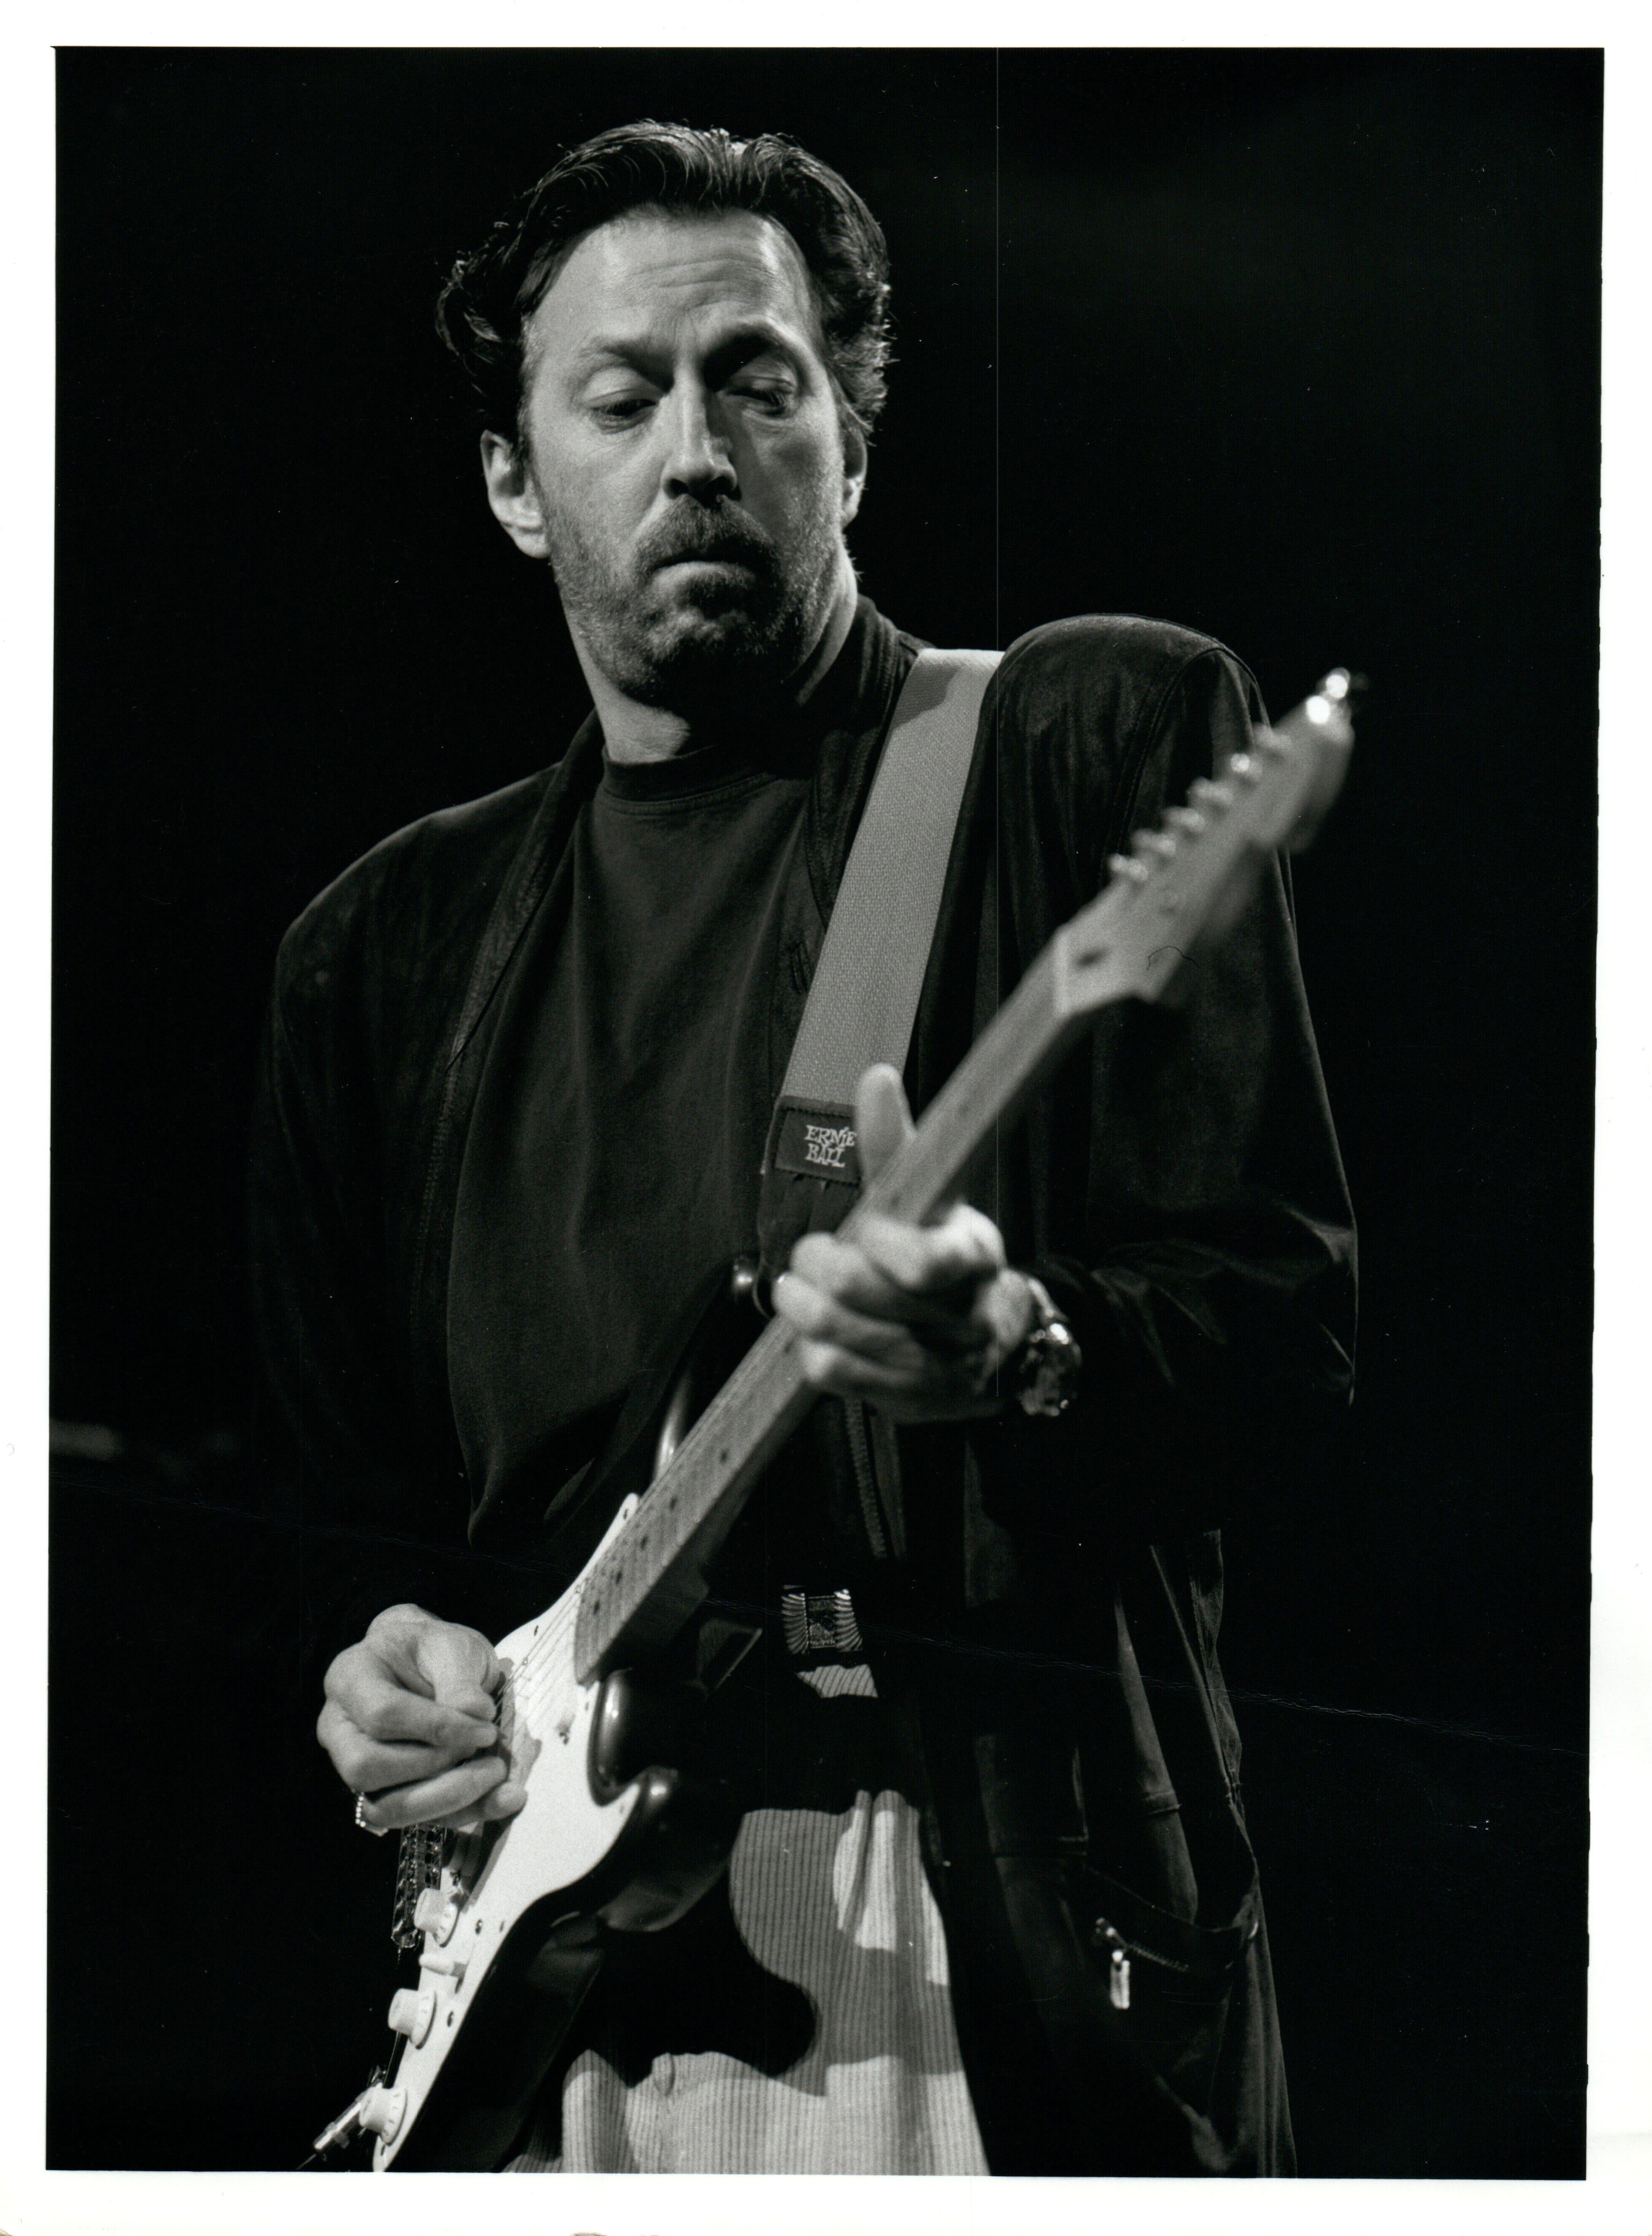 Geoff Swaine Black and White Photograph - Eric Clapton Playing Guitar Vintage Original Photograph